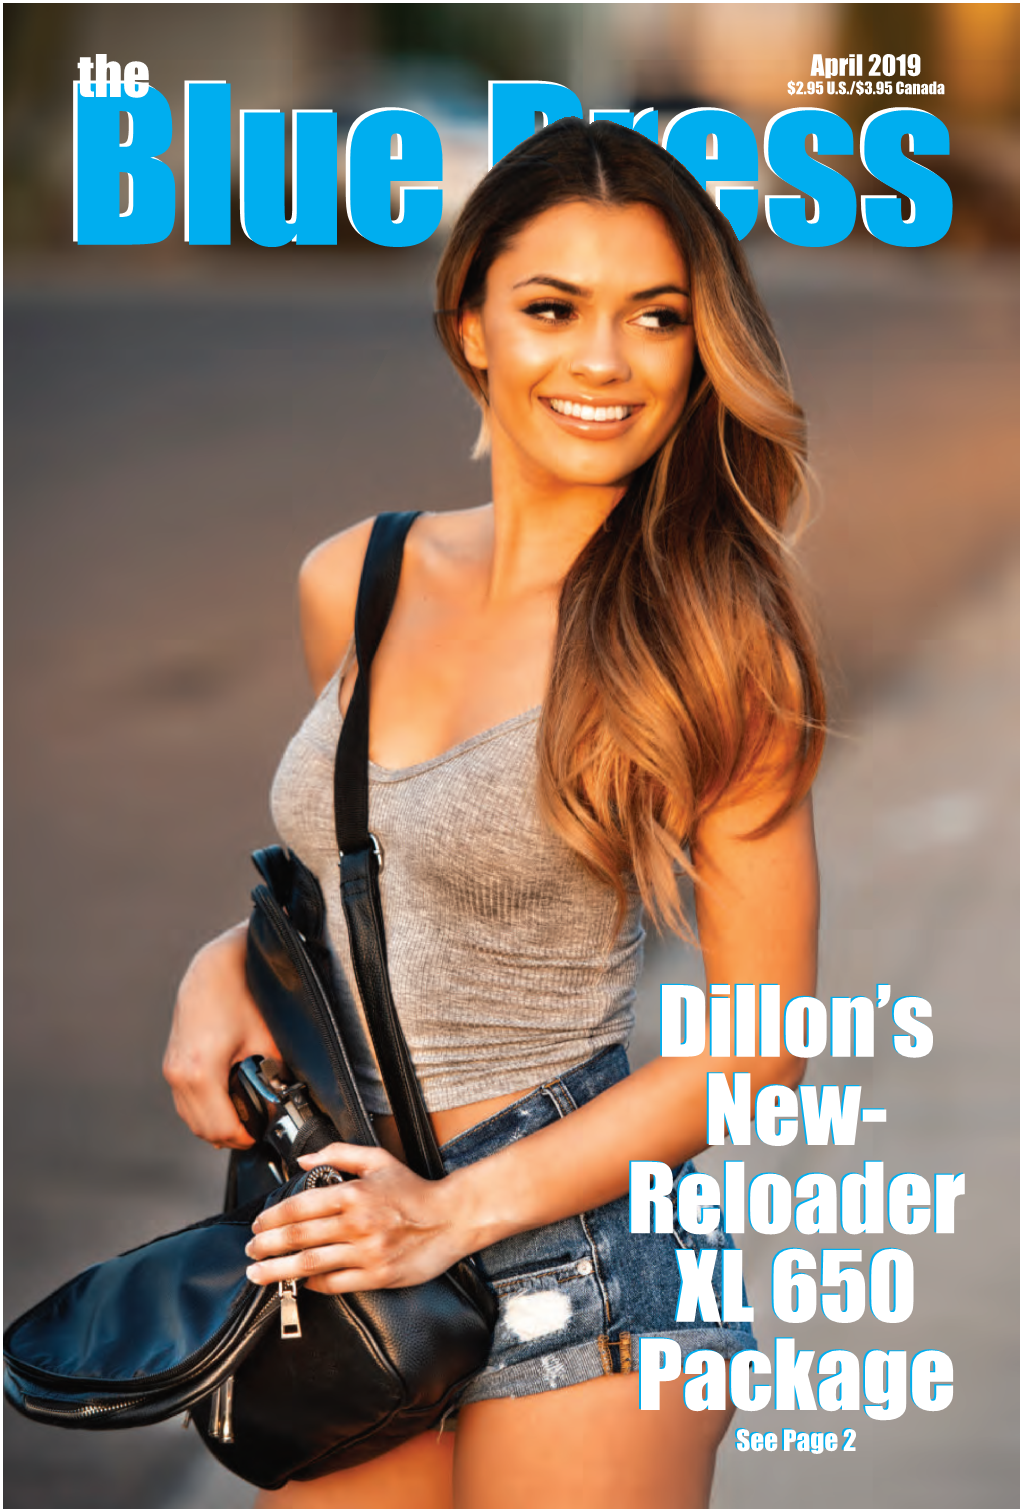 Reloader XL 650 Package Dillon's